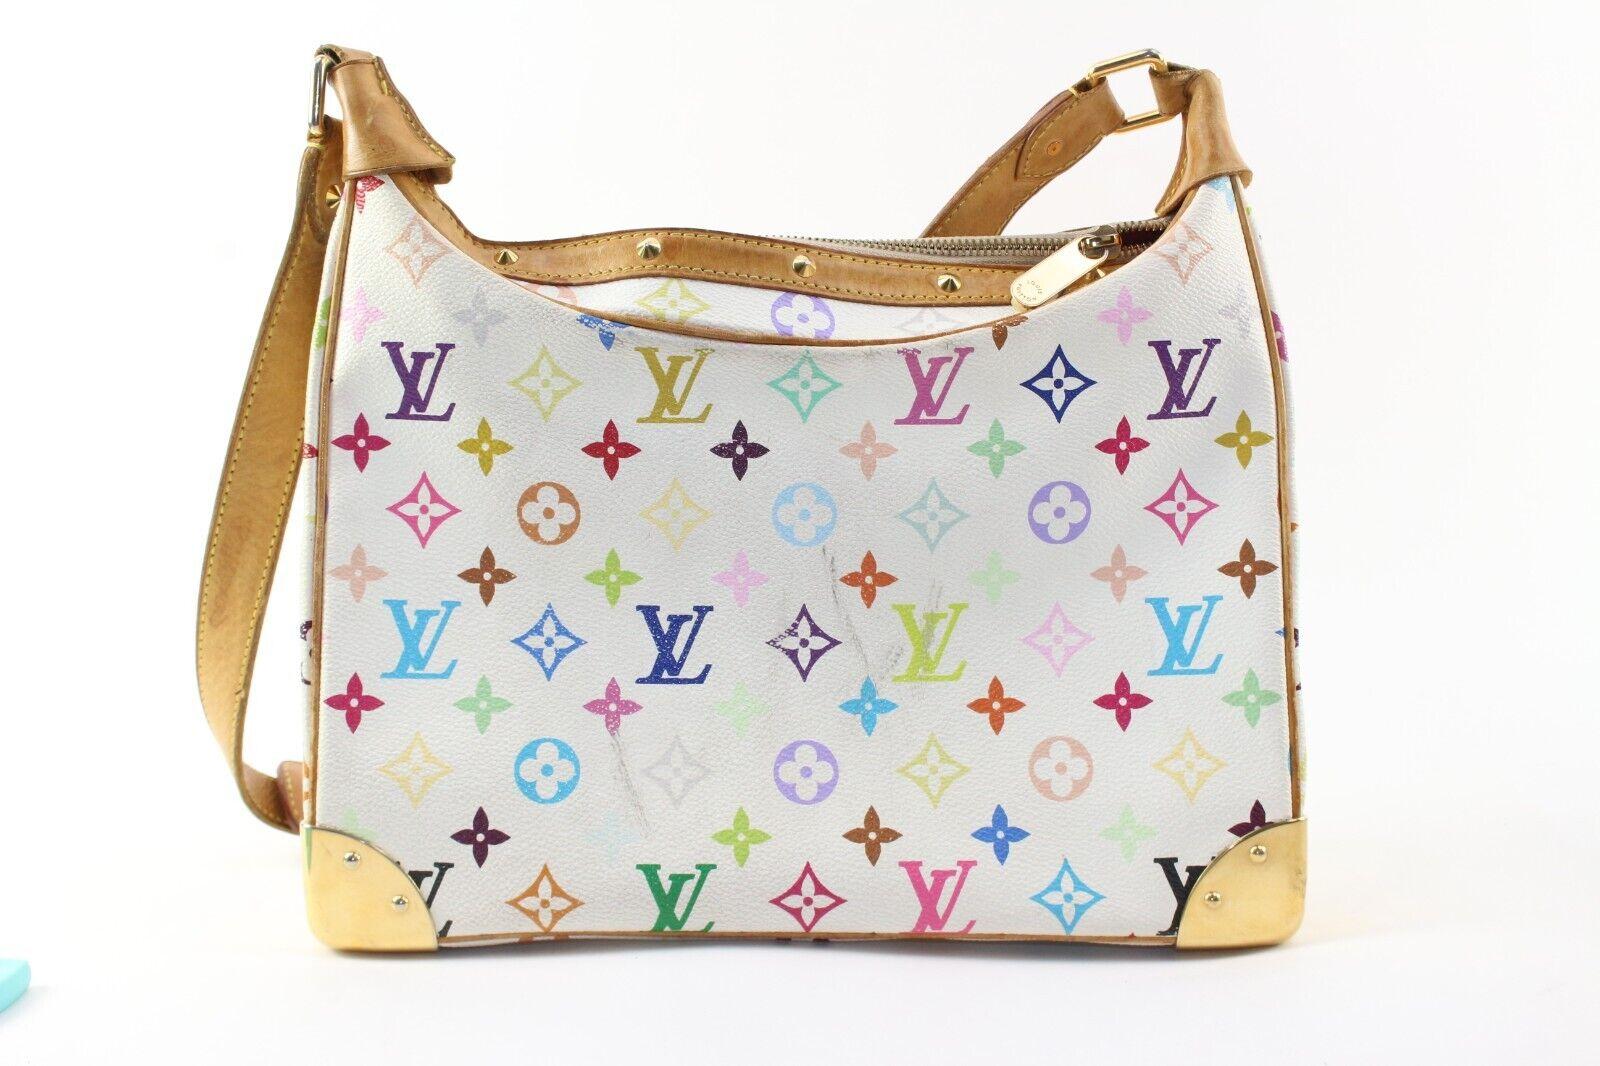 LOUIS VUITTON Boulogne Multicolor Monogram Hobo 2LV1226K In Good Condition For Sale In Dix hills, NY